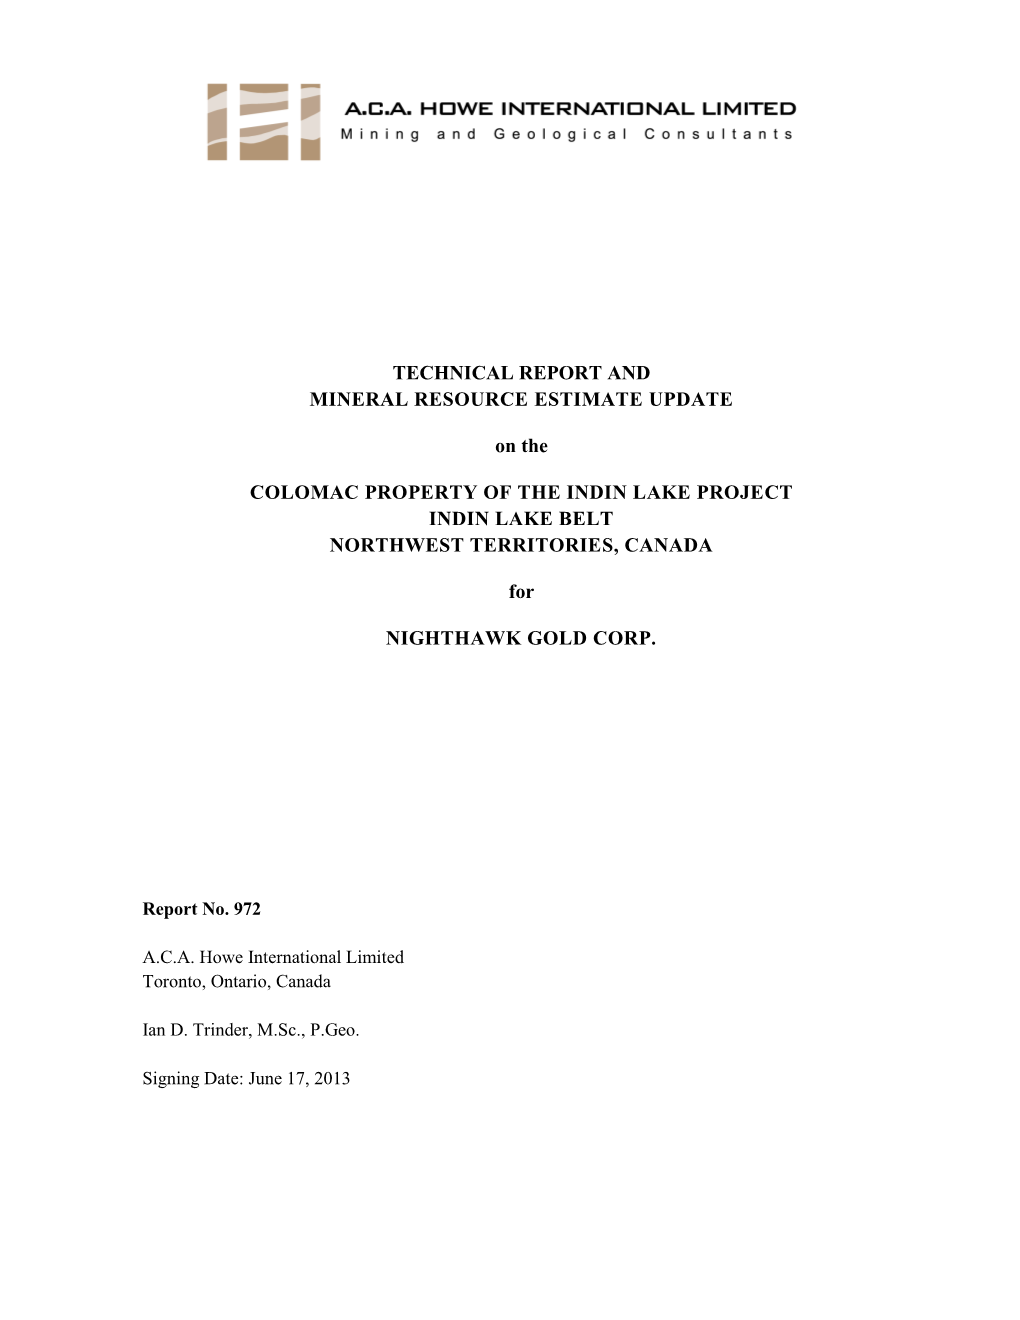 2013 Technical Report & Mineral Resource Estimate Update on The